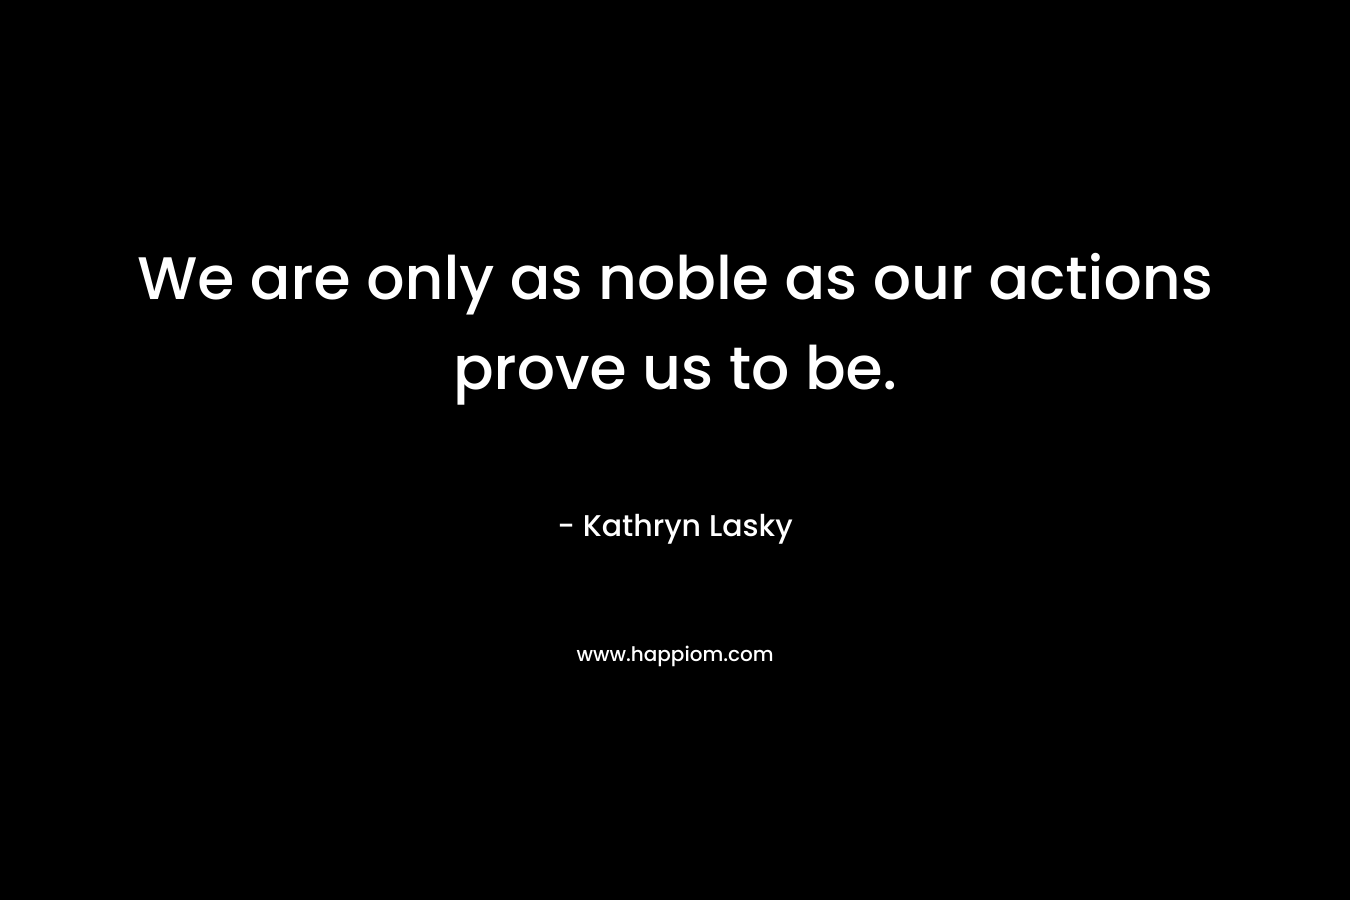 We are only as noble as our actions prove us to be.